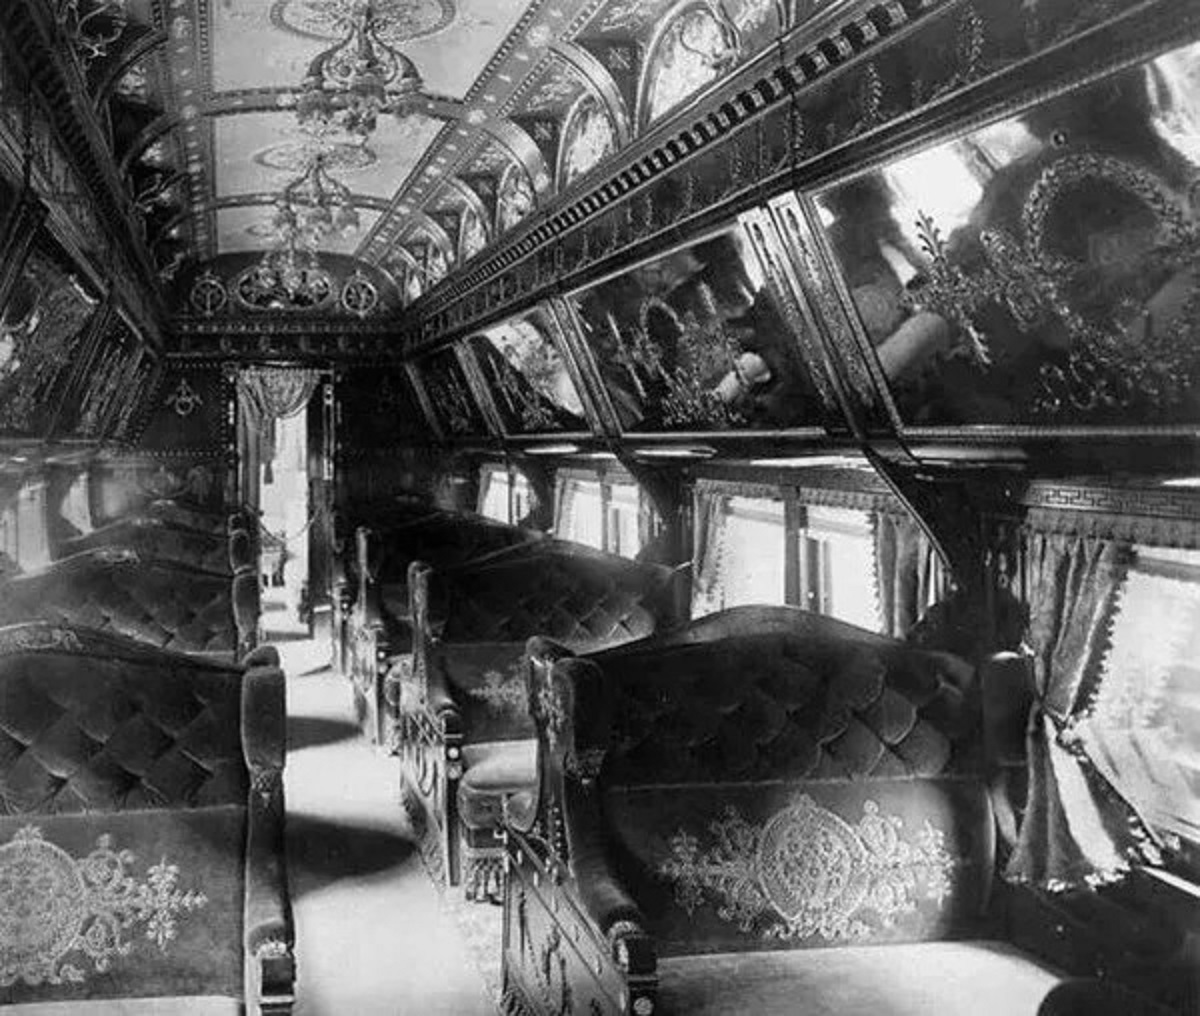 Train travel in the 1890s.